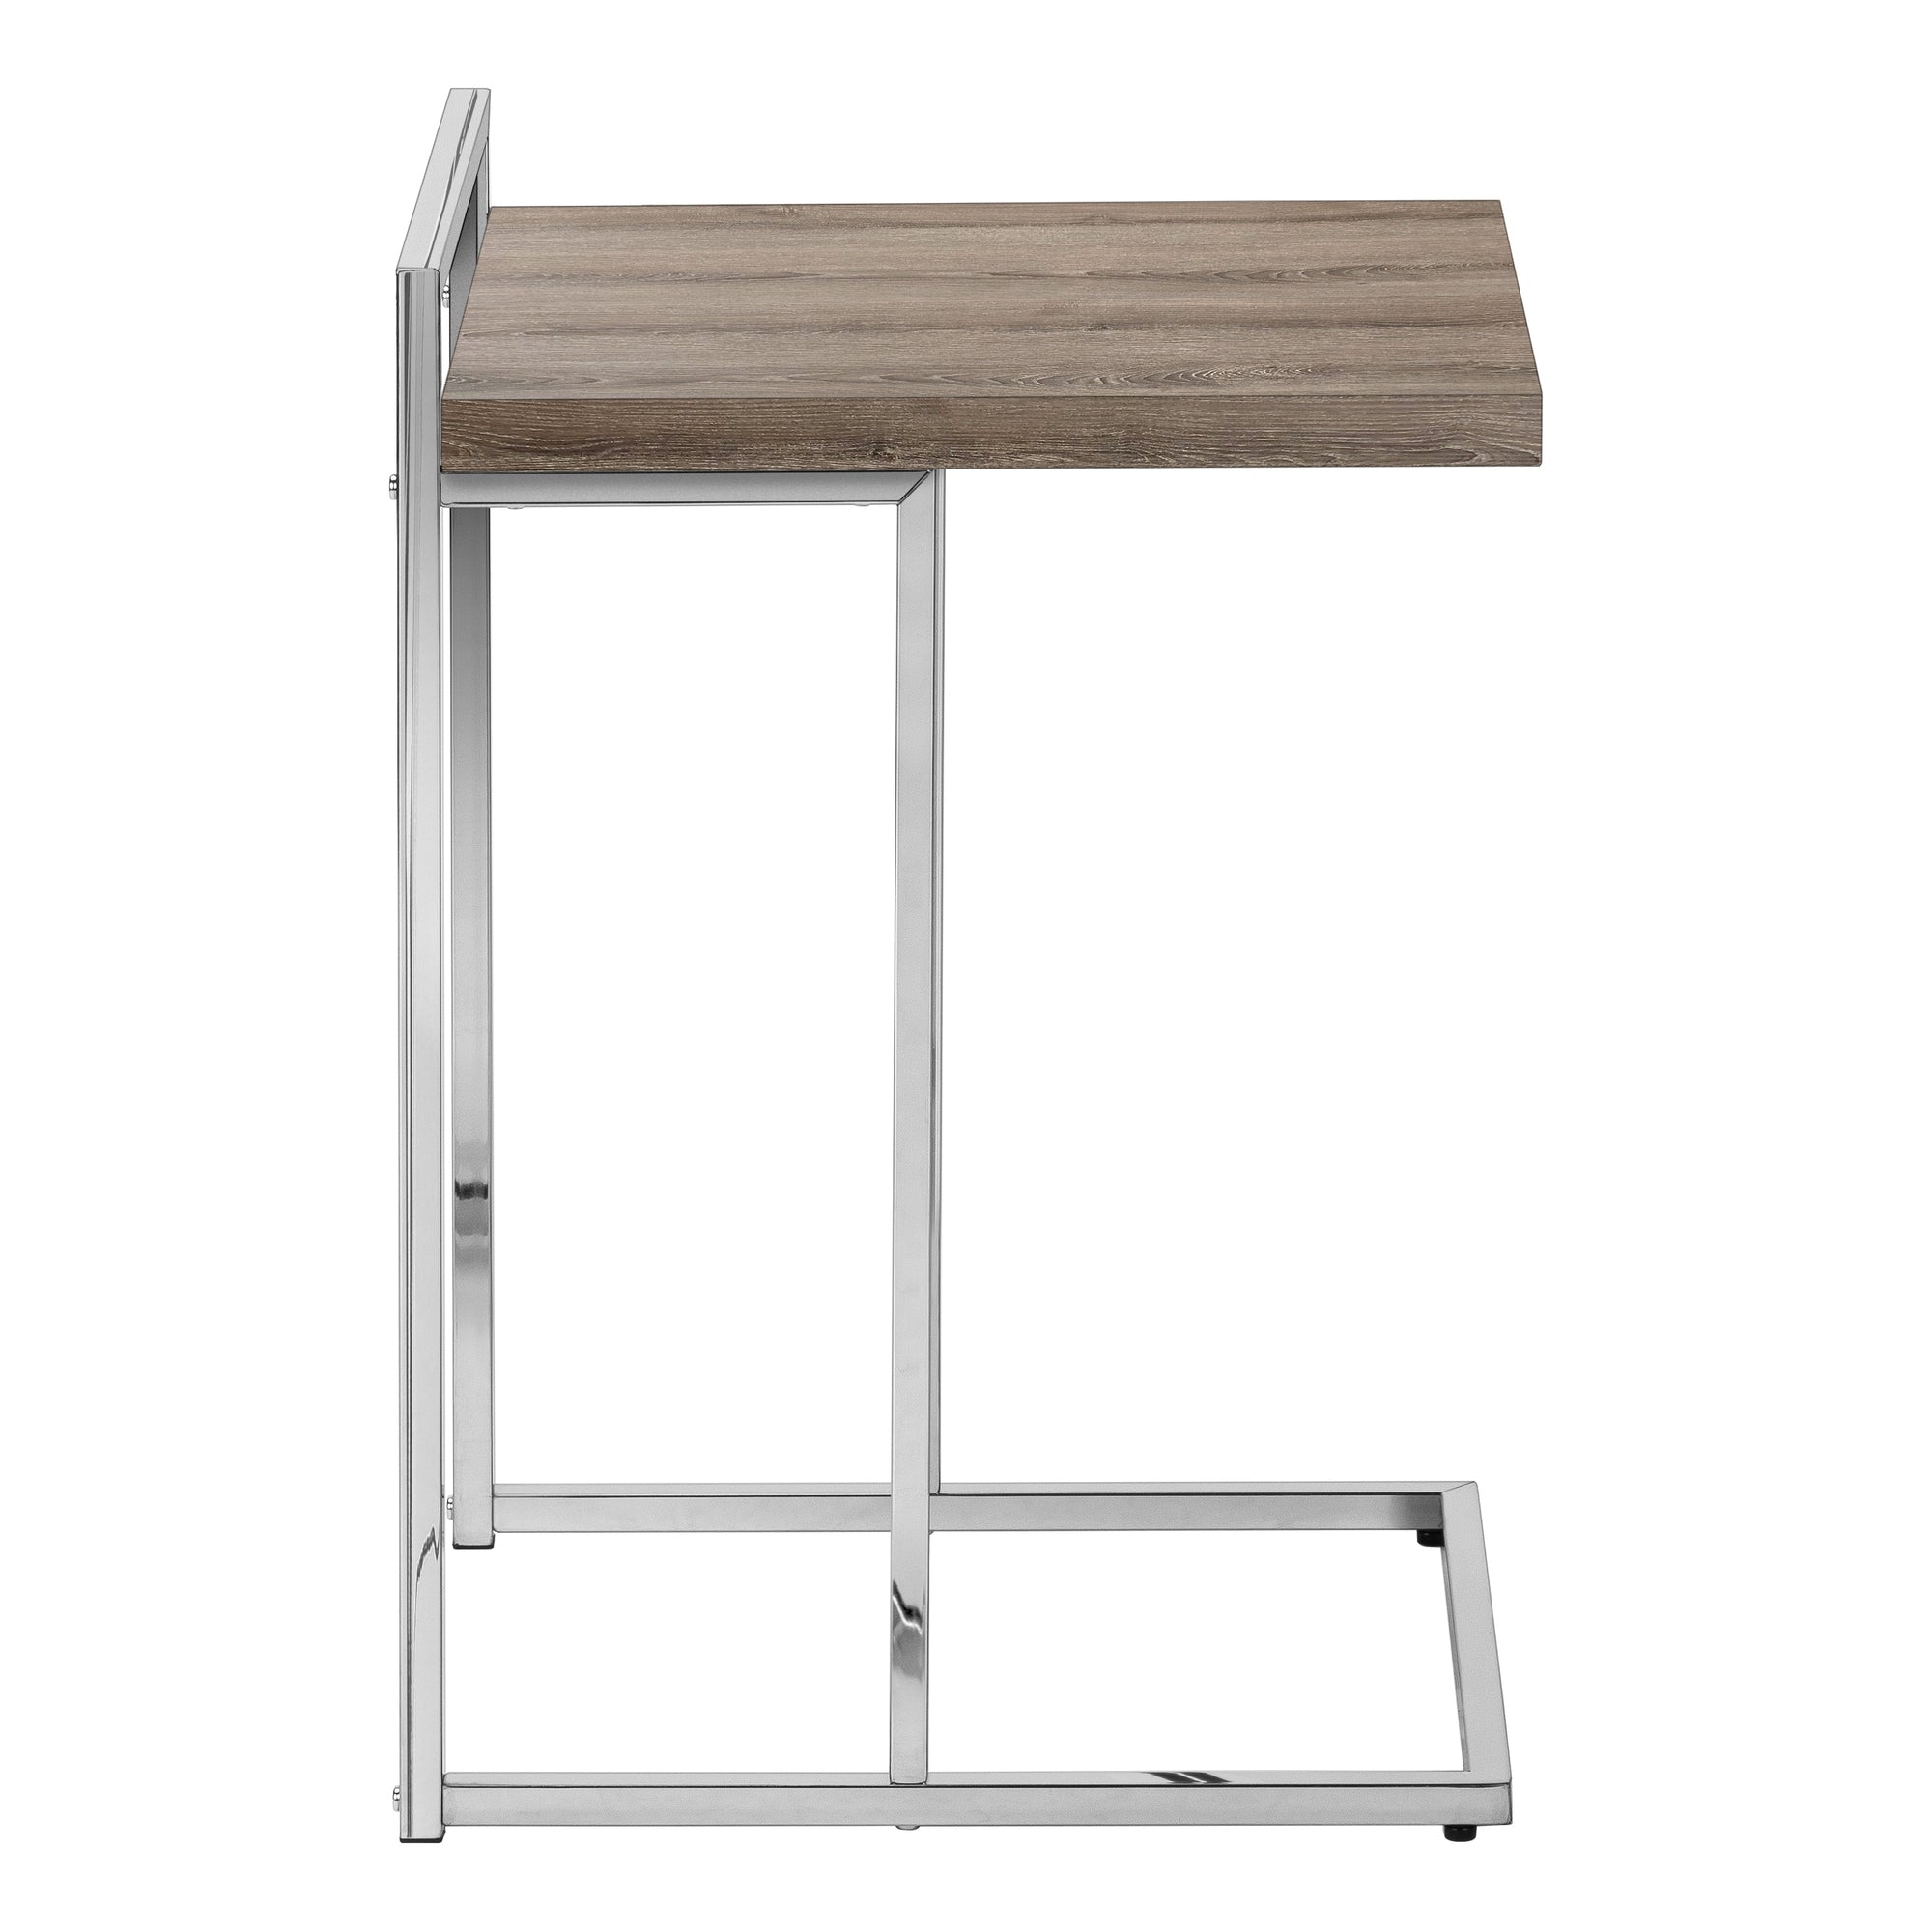 Accent Table - 25H / Dark Taupe / Chrome Metal